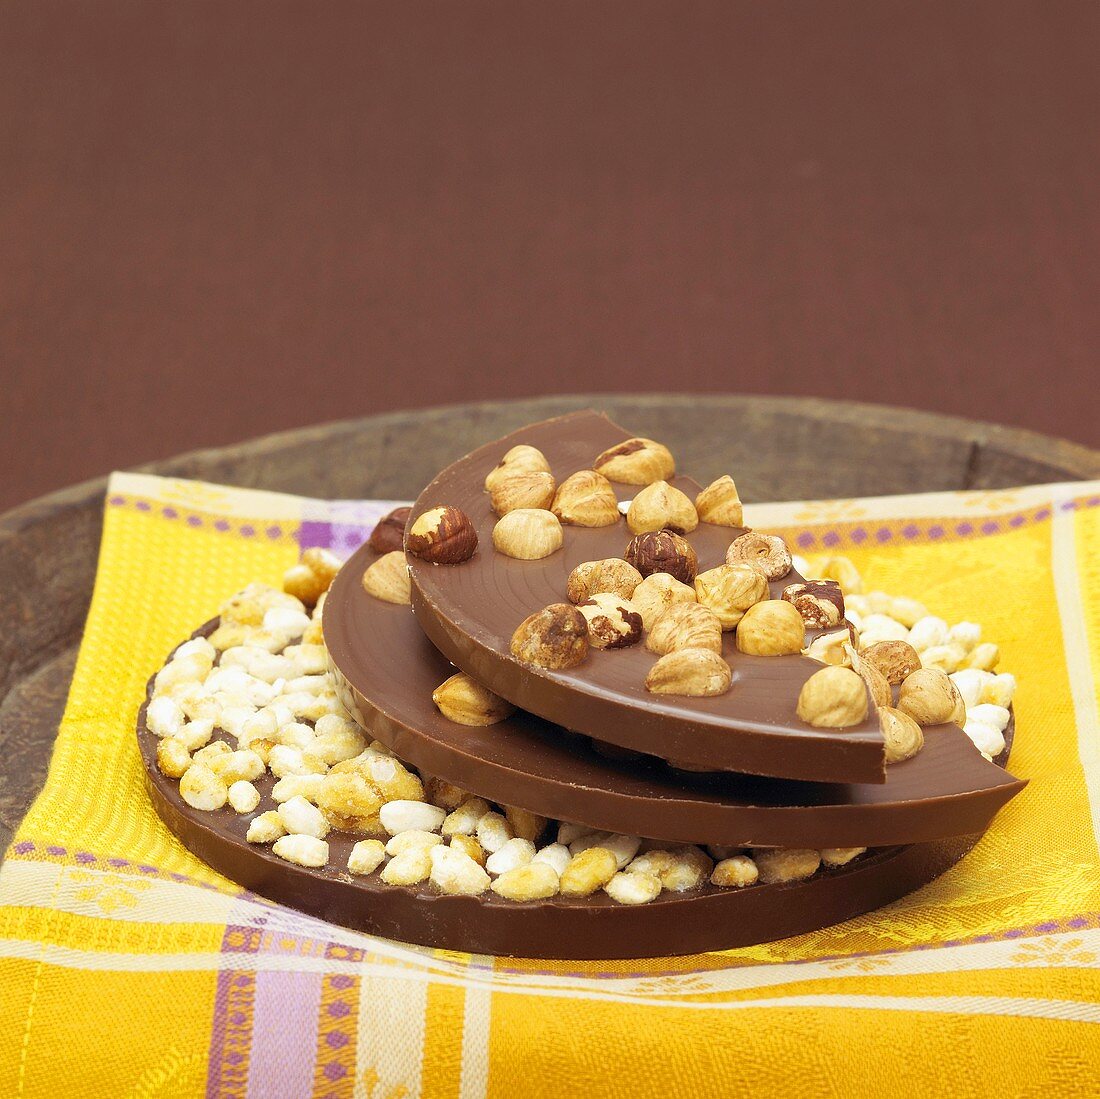 Chocolate with hazelnuts and with puffed rice